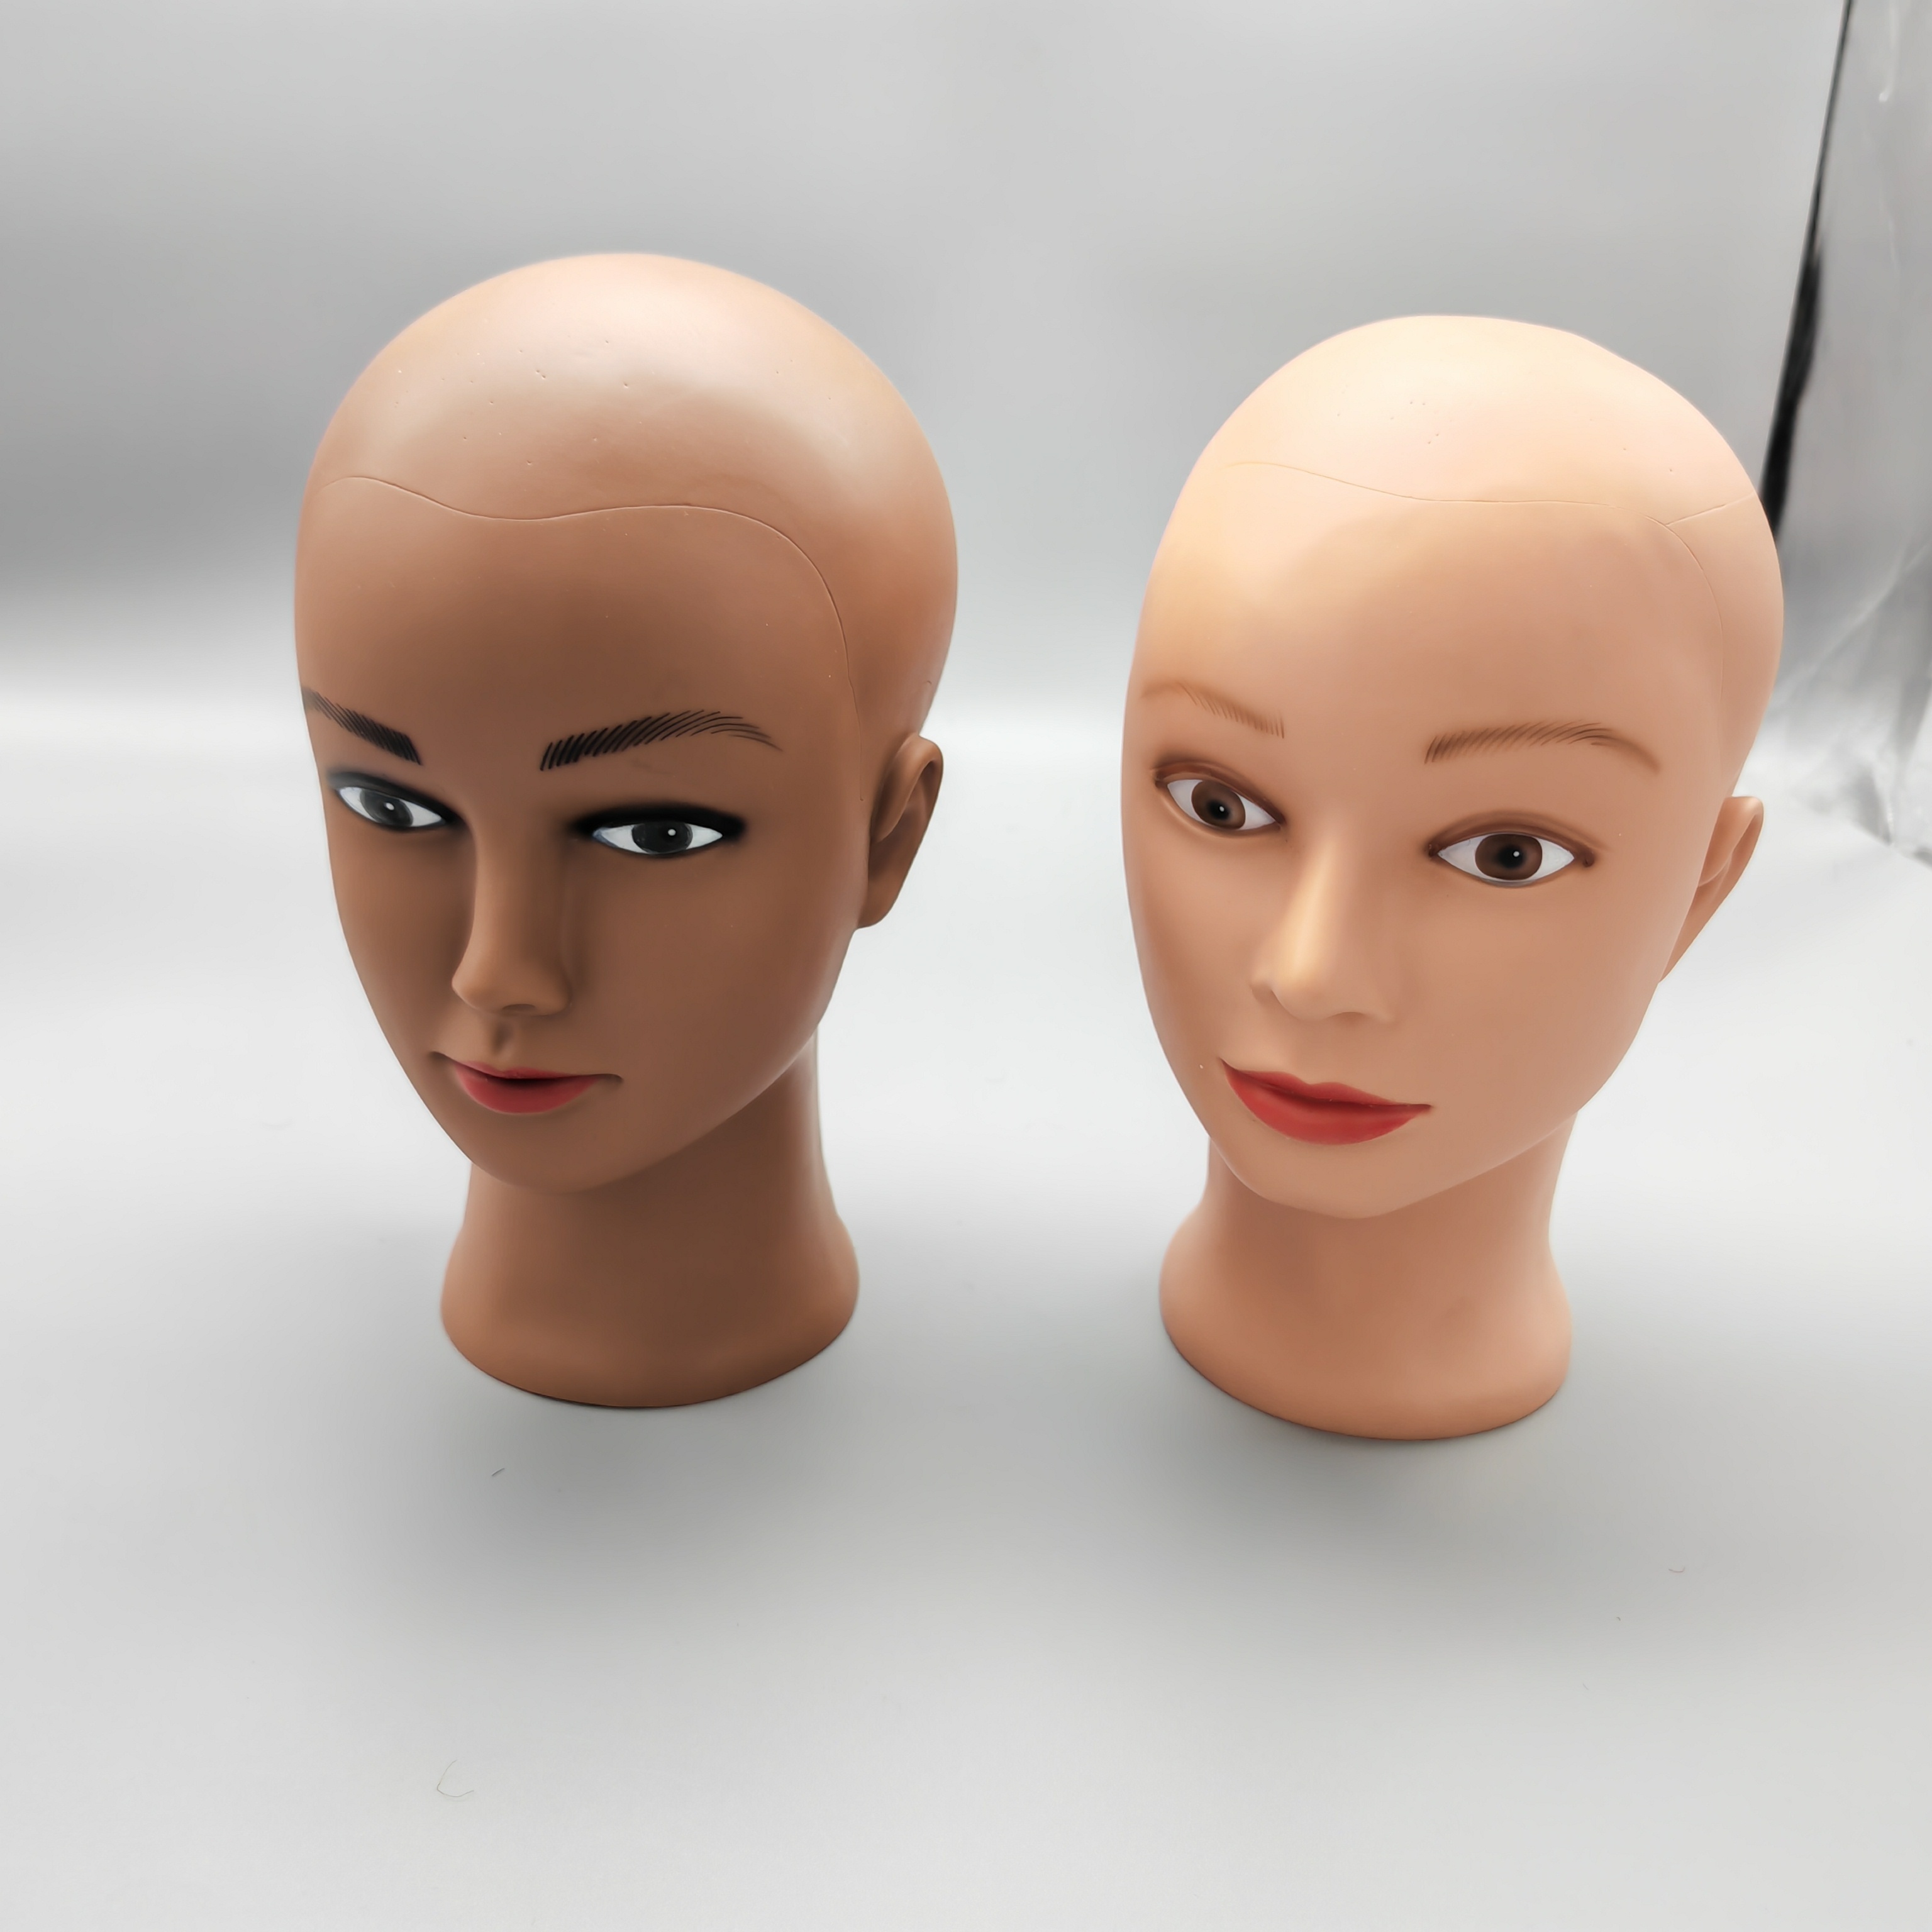 Soft Rubber Cosmetology Practice Training Head Mannequin For